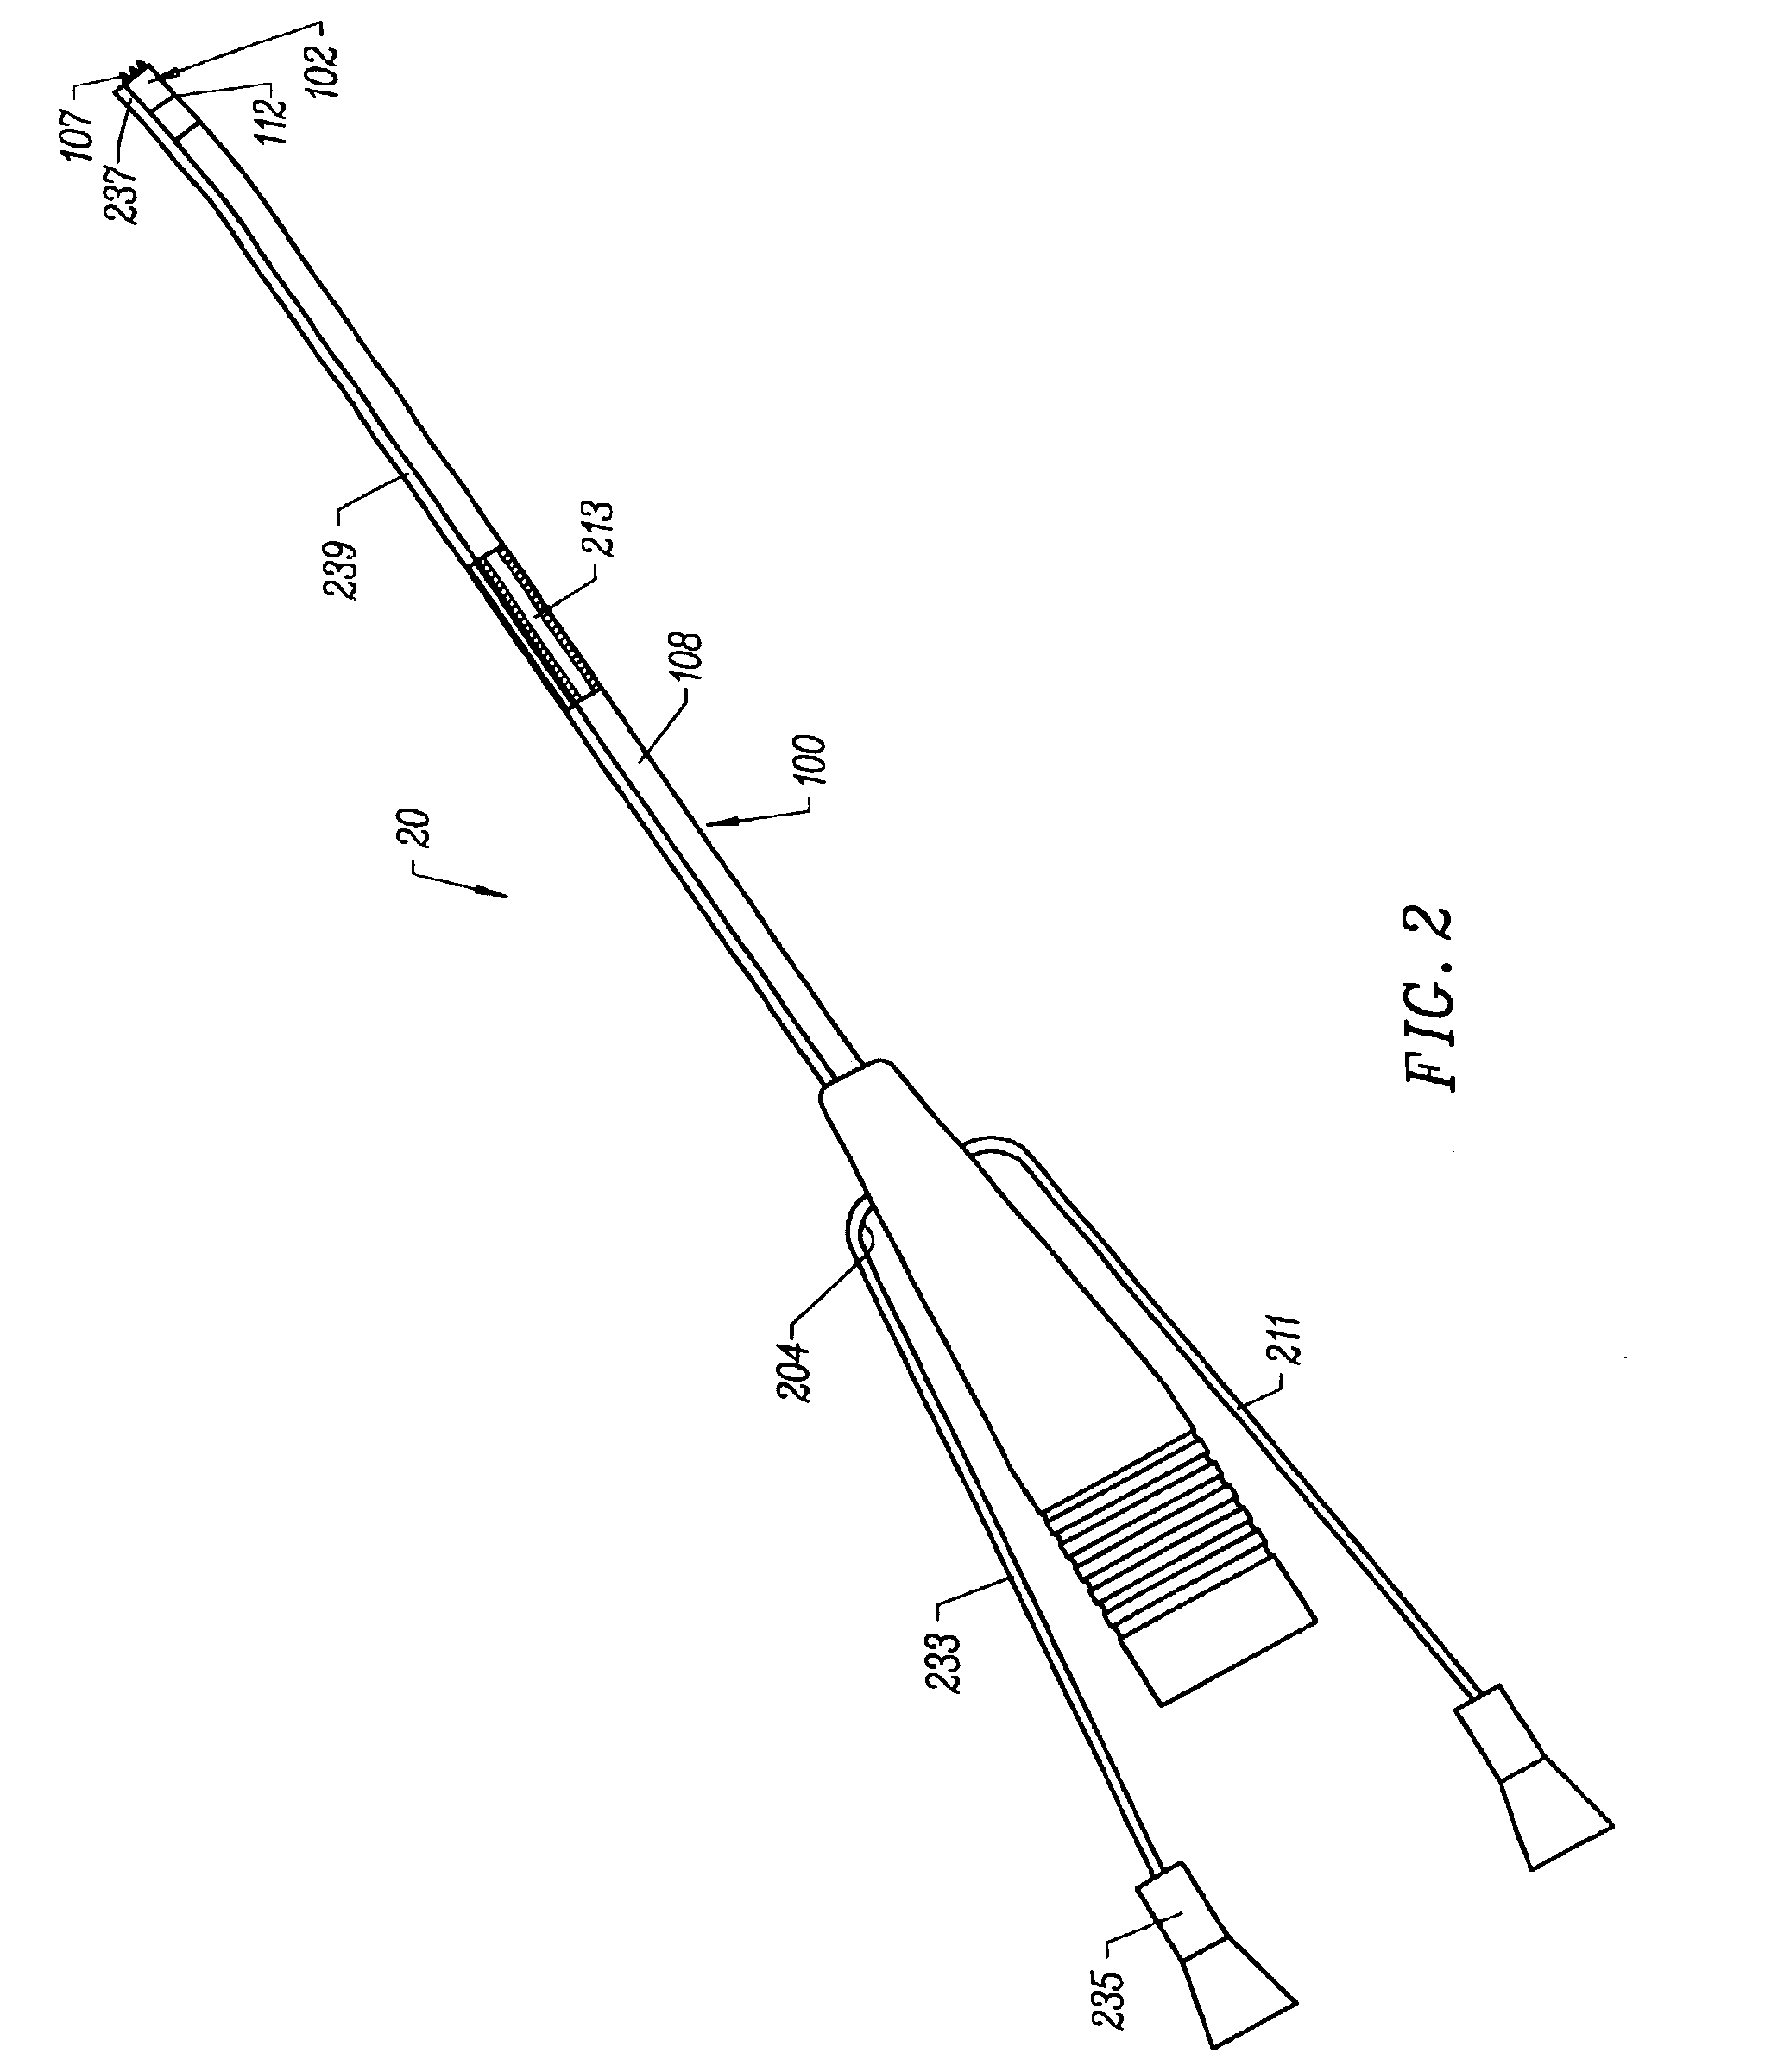 Systems and methods for electrosurigical treatment of obstructive sleep disorders